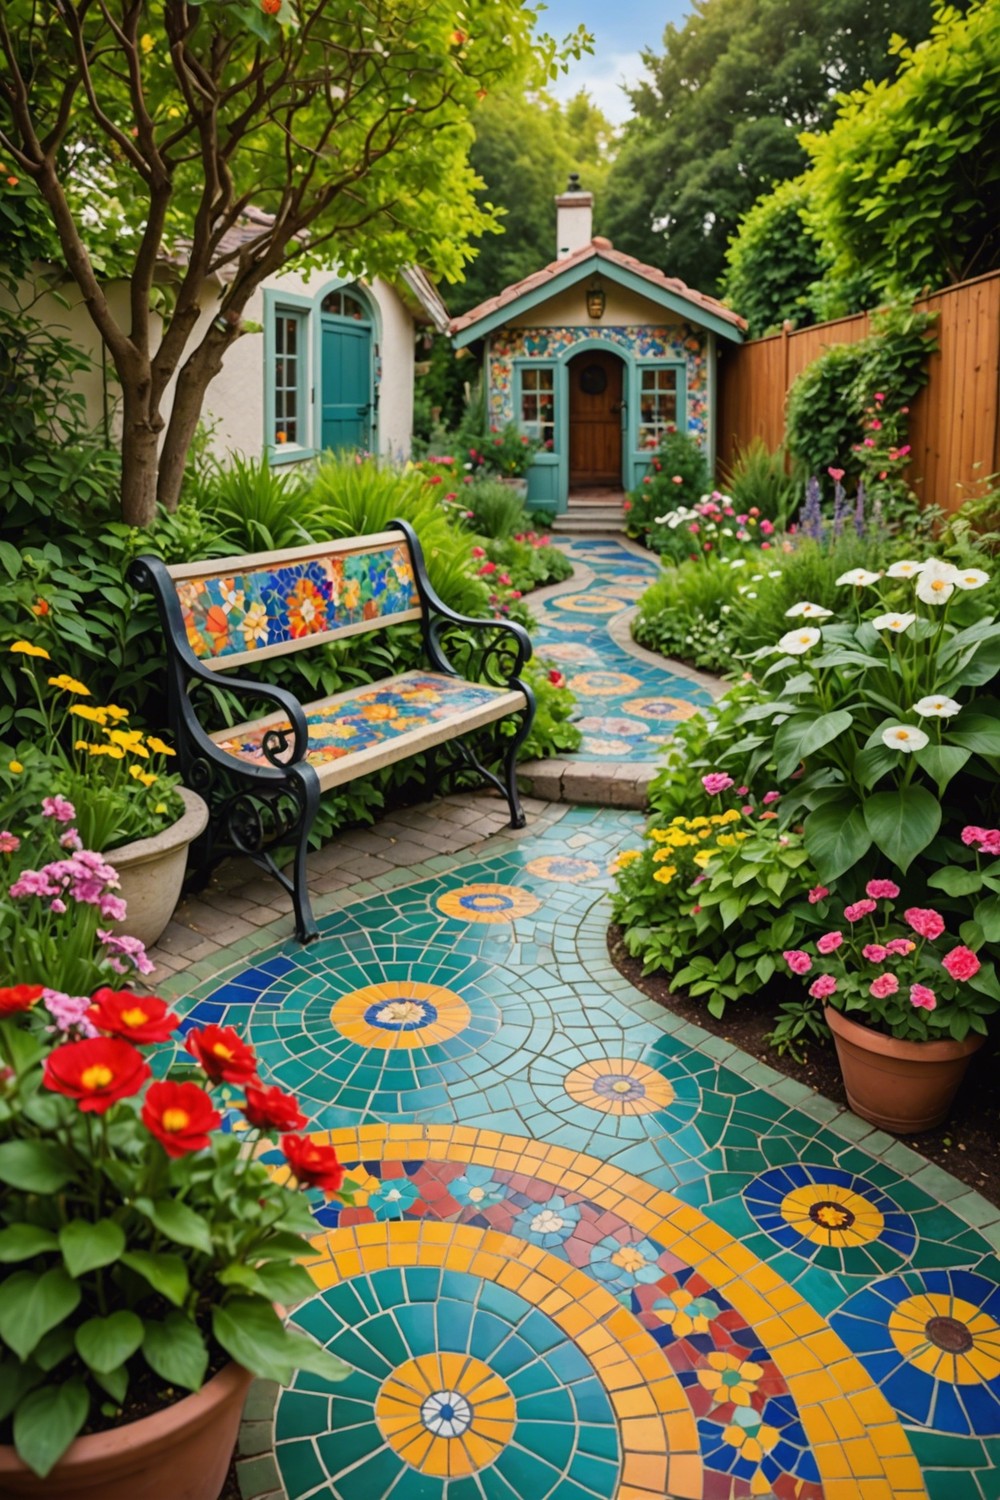 Whimsical Mosaic Accents